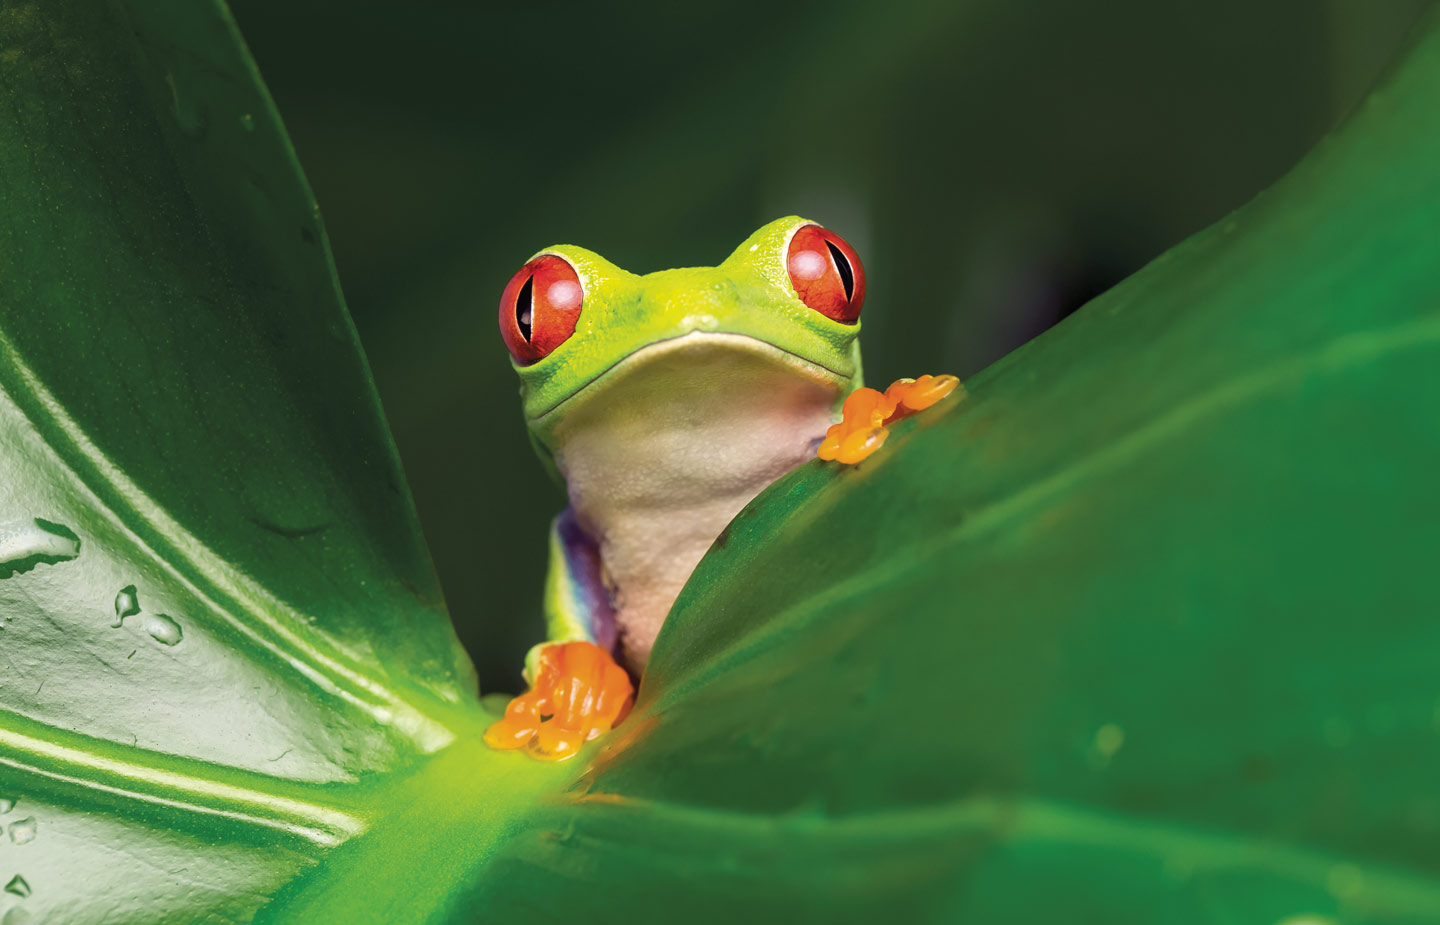 Image of a light green frog with red eyes on a leaf